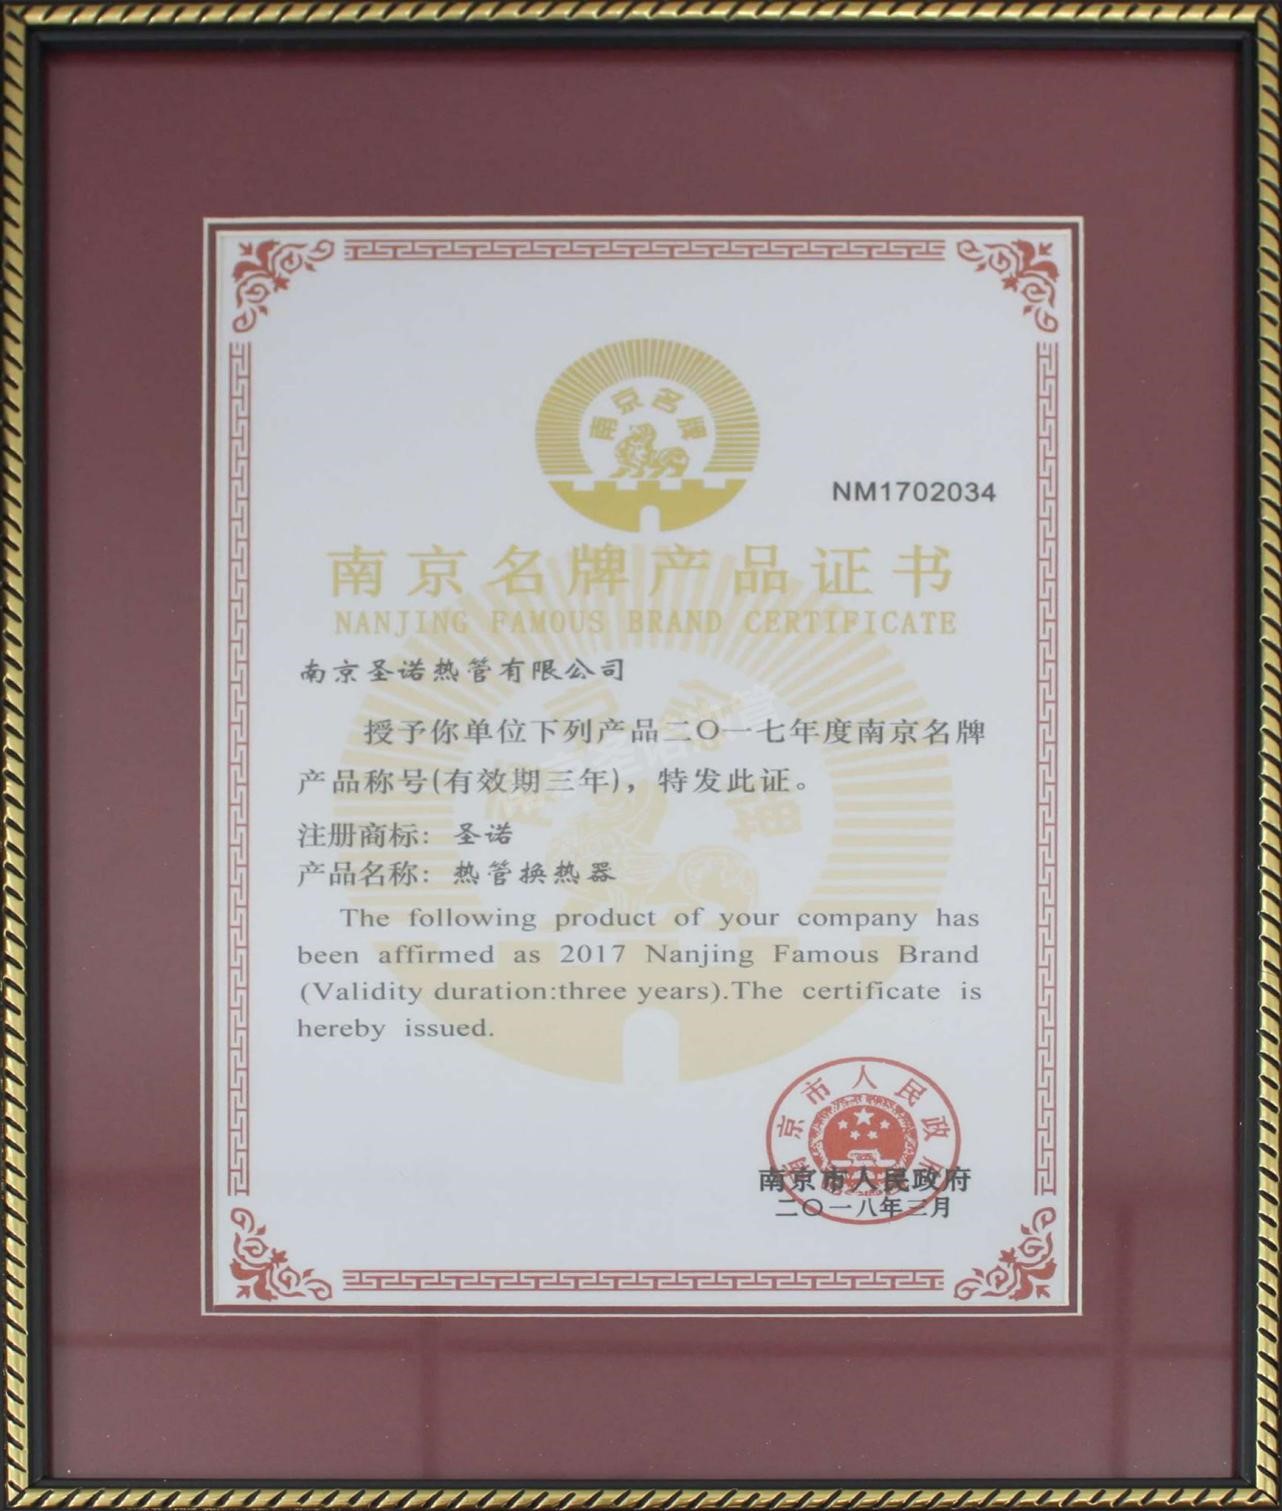 NSN Heat pipe heat exchanger again won the title of Nanjing famous brand products